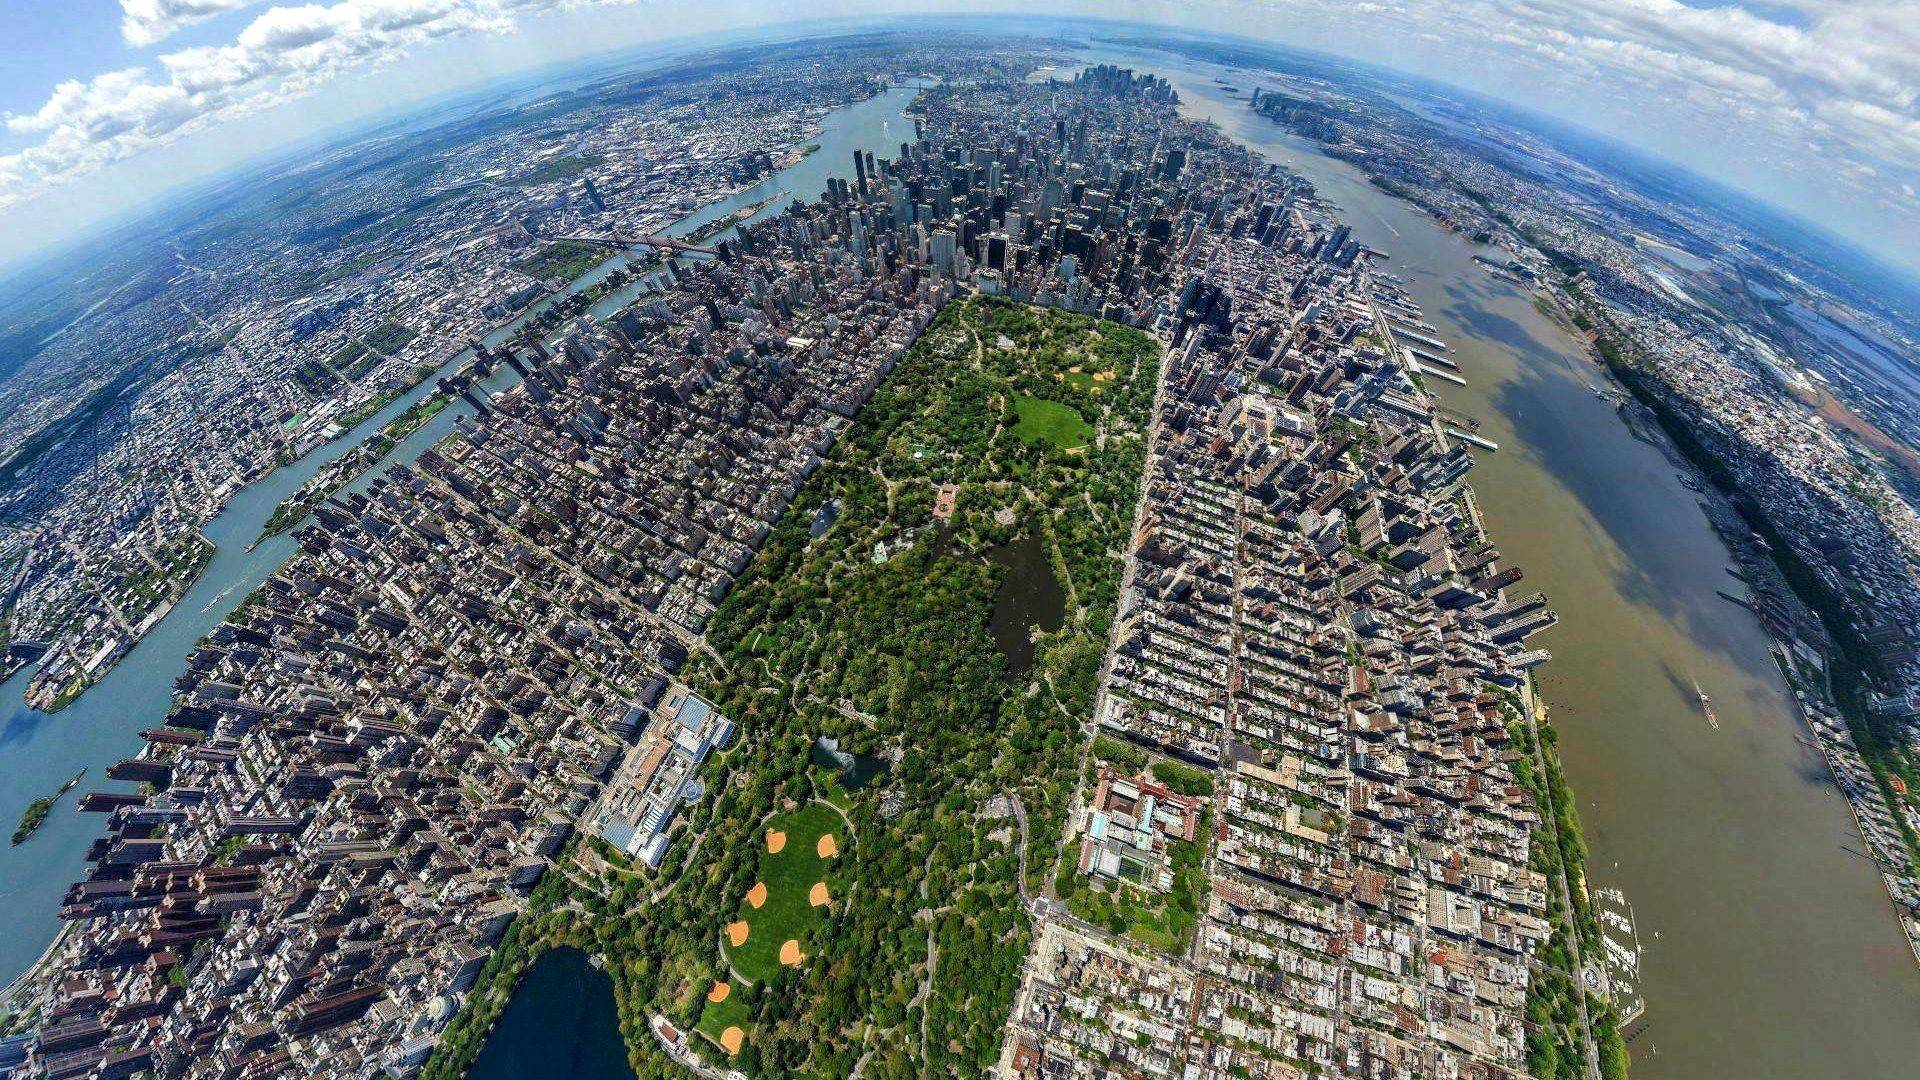 Central Park New York One - Central Park New York Wallpaper Iphone , HD Wallpaper & Backgrounds